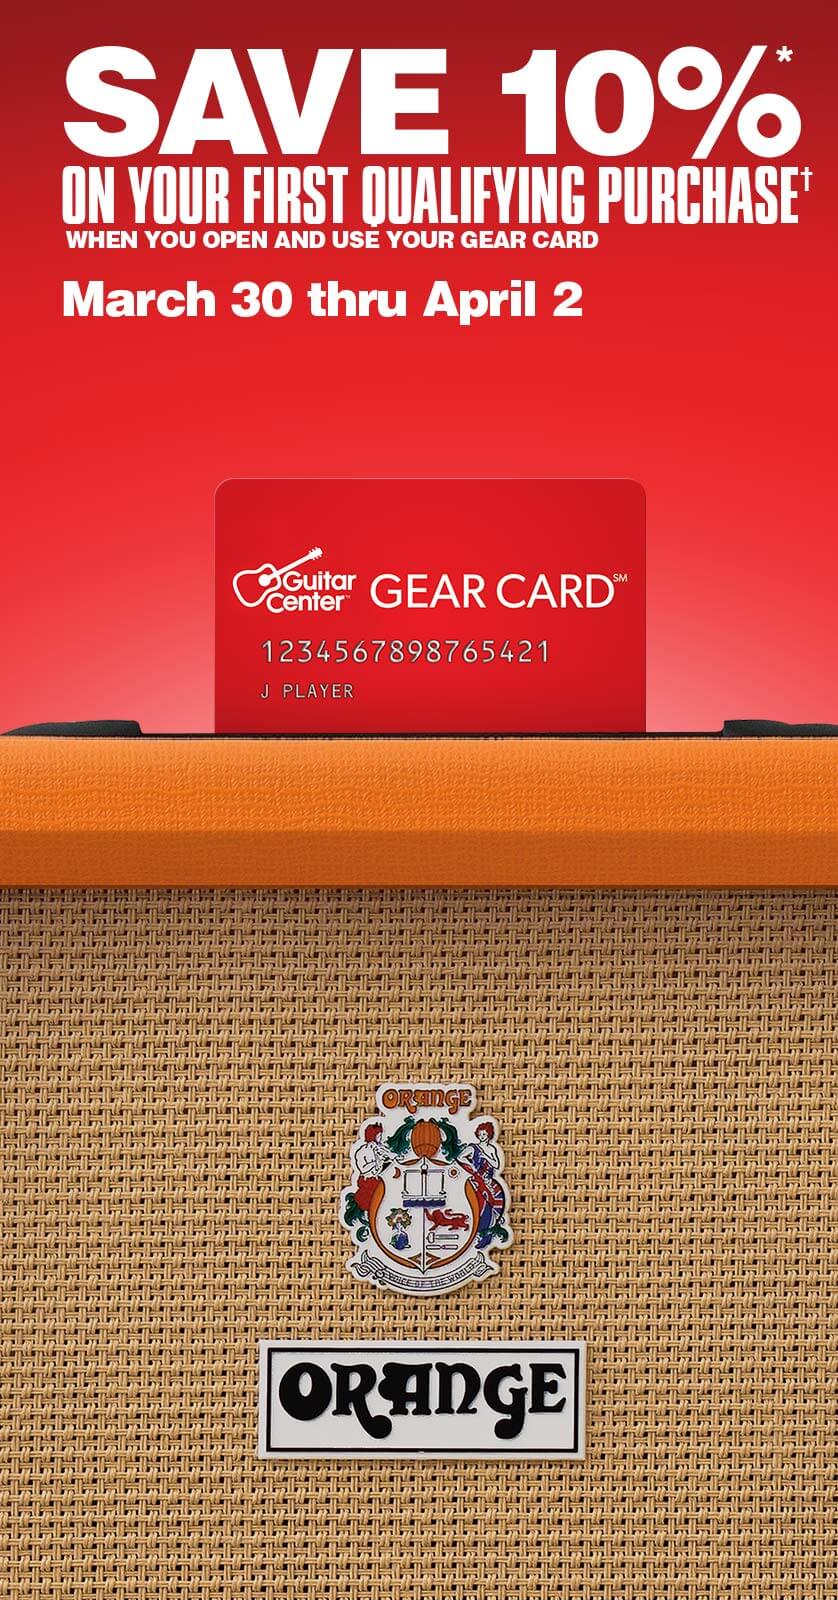 Save 10 percent on your first qualifying purchase when you open and use your Guitar Center Gear Card.